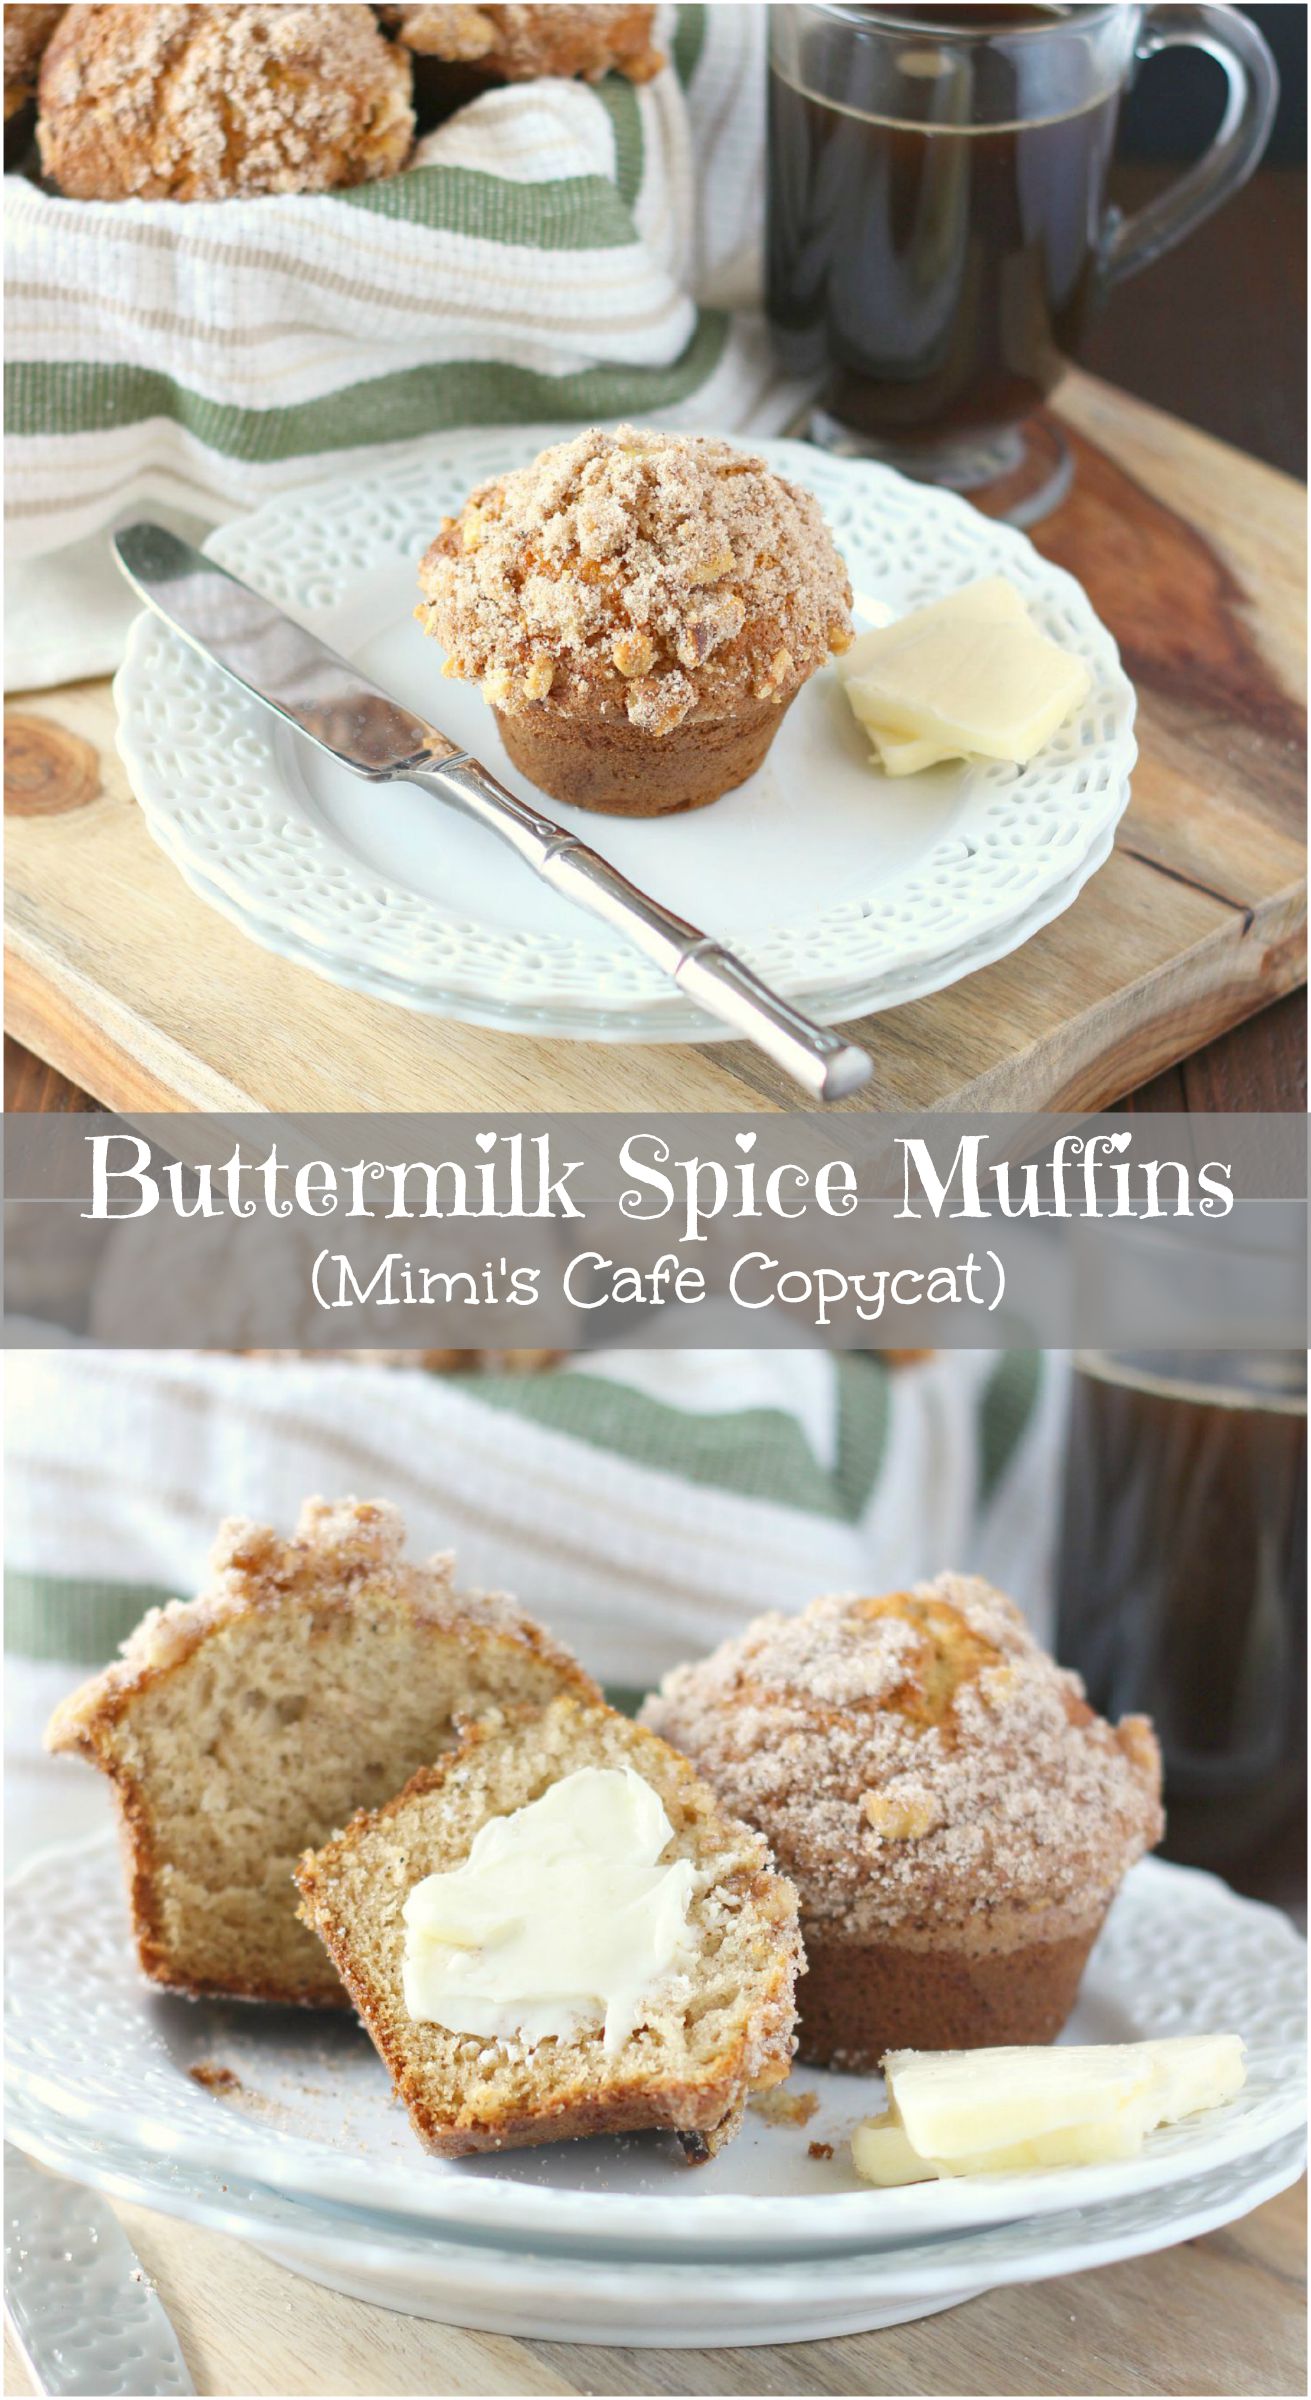 Buttermilk Spice Muffins (Mimi's Cafe Copycat) ~ mykitchencraze.com ~ These muffins are perfect for breakfast! Serve warm and with some butter. You'll be in heaven!